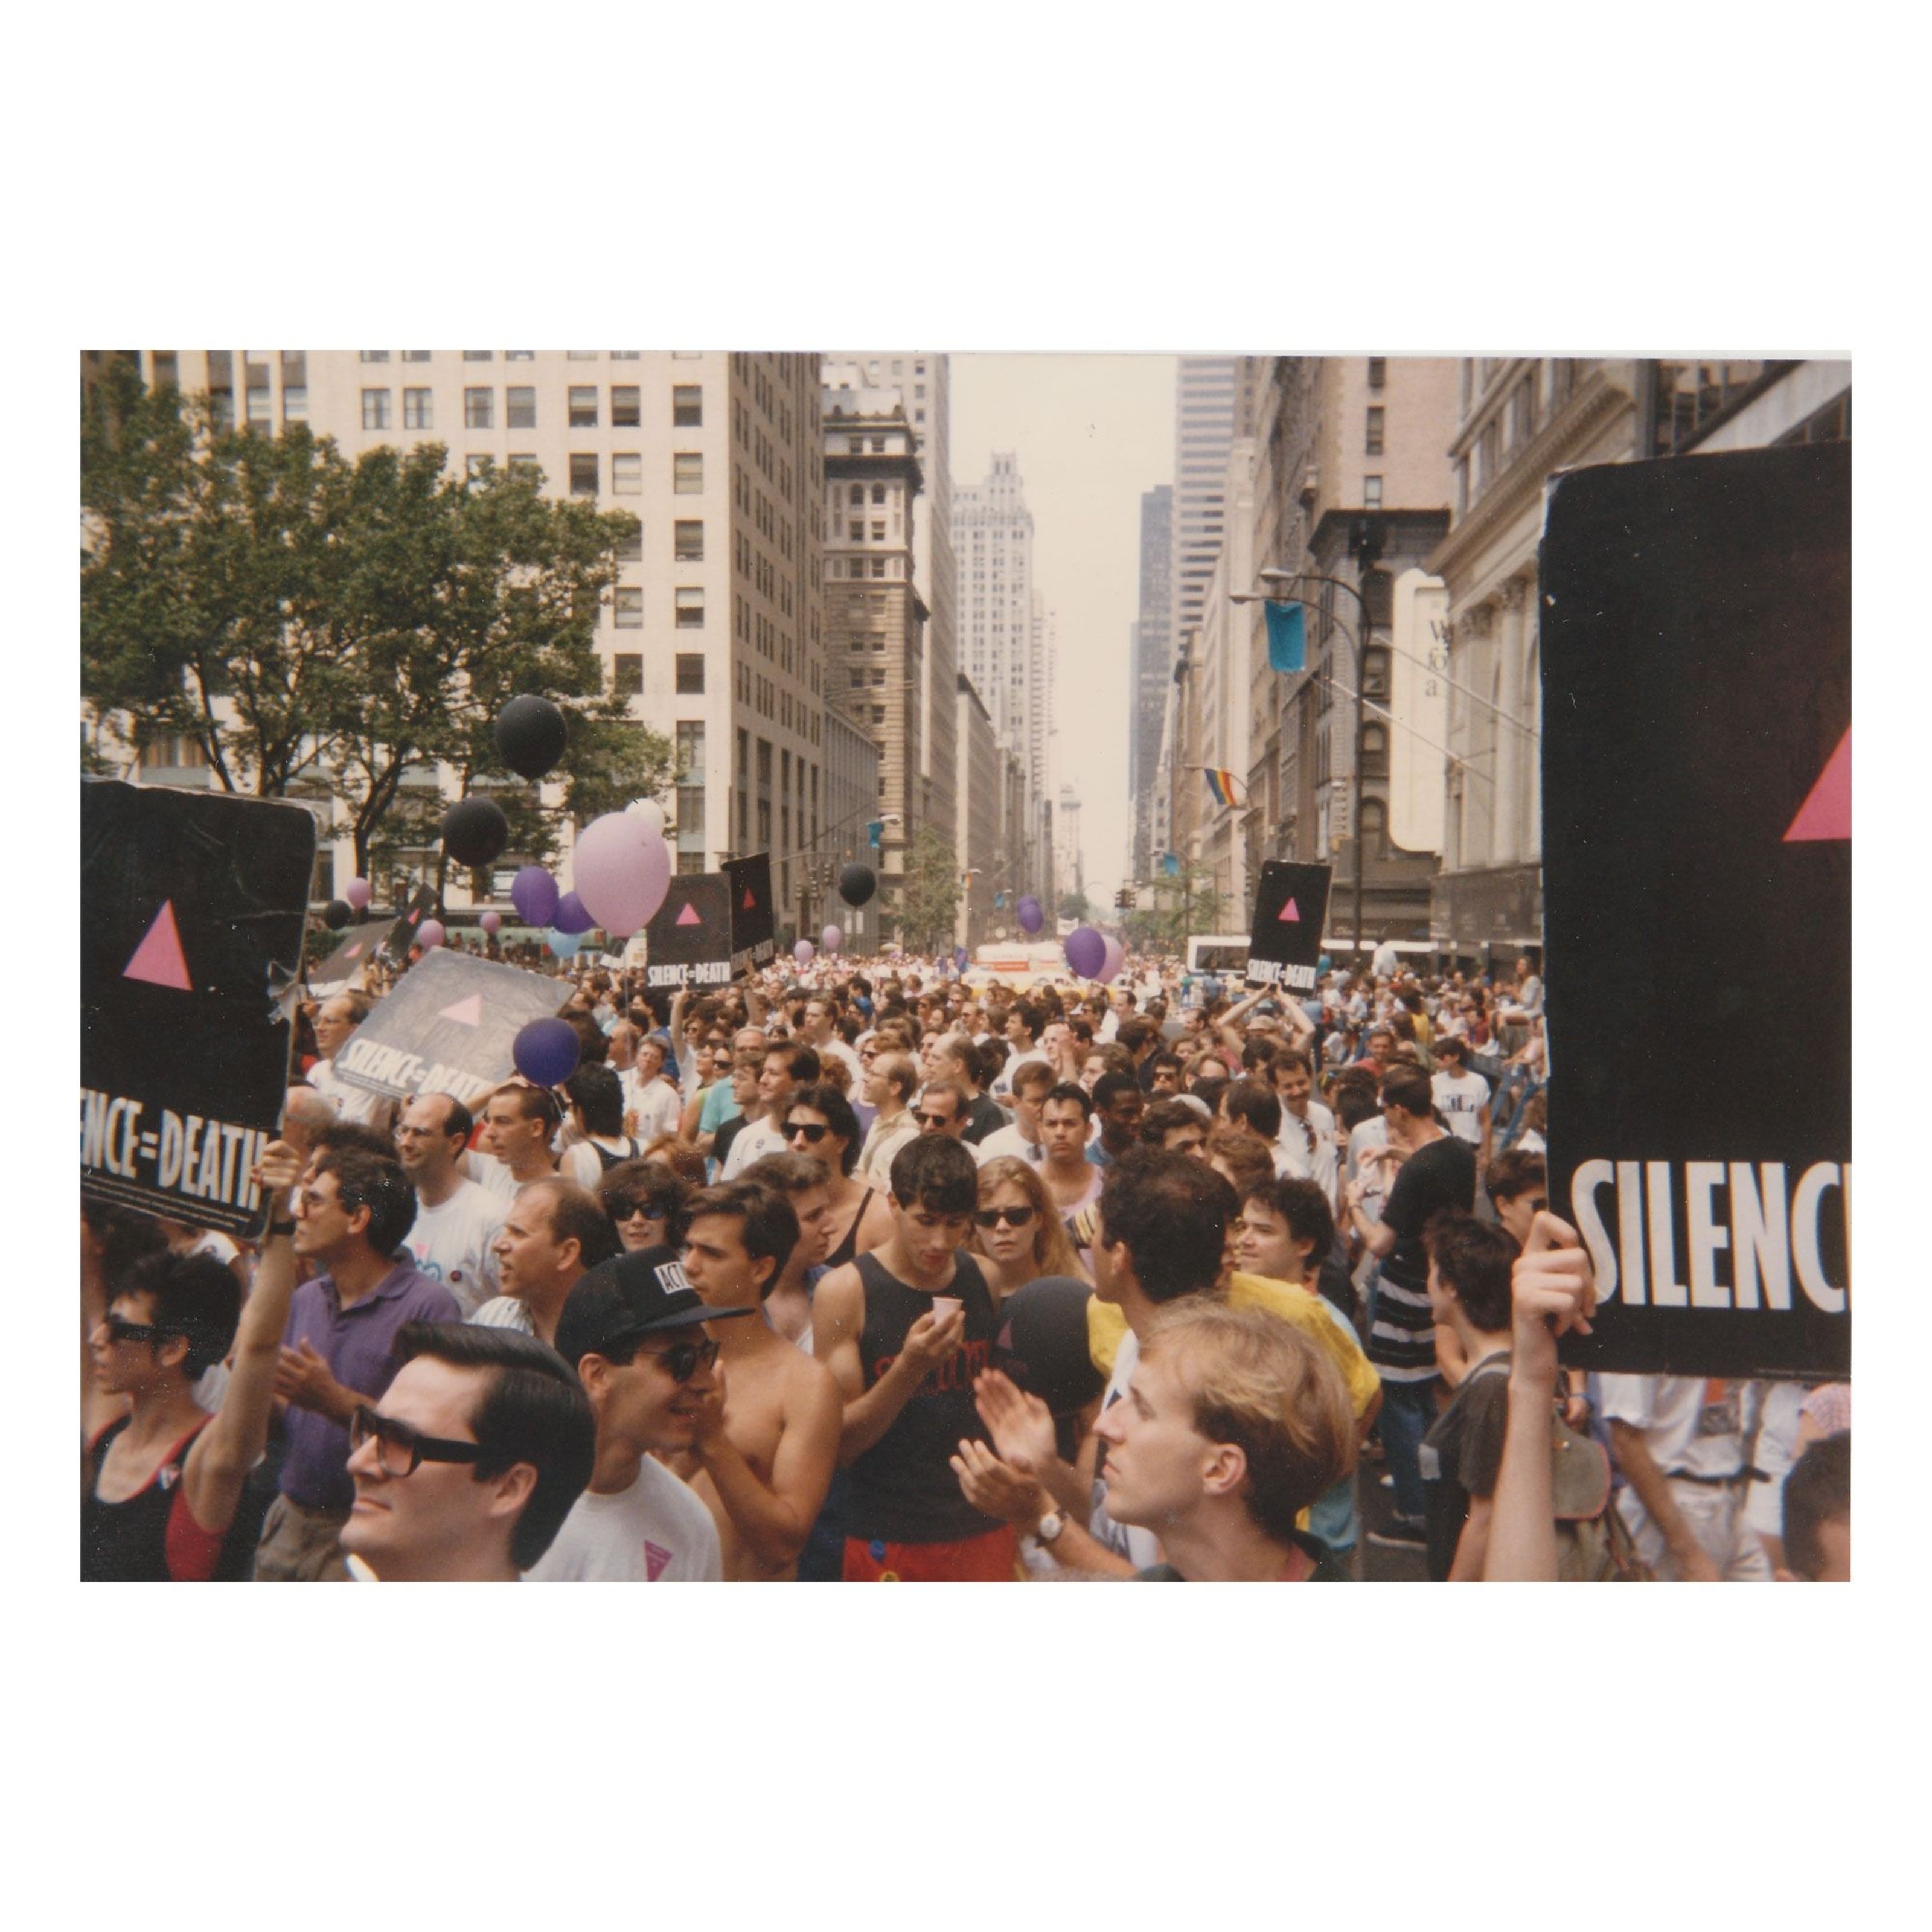 Photograph of LGBTQ protesters marching on an avenue holding signs